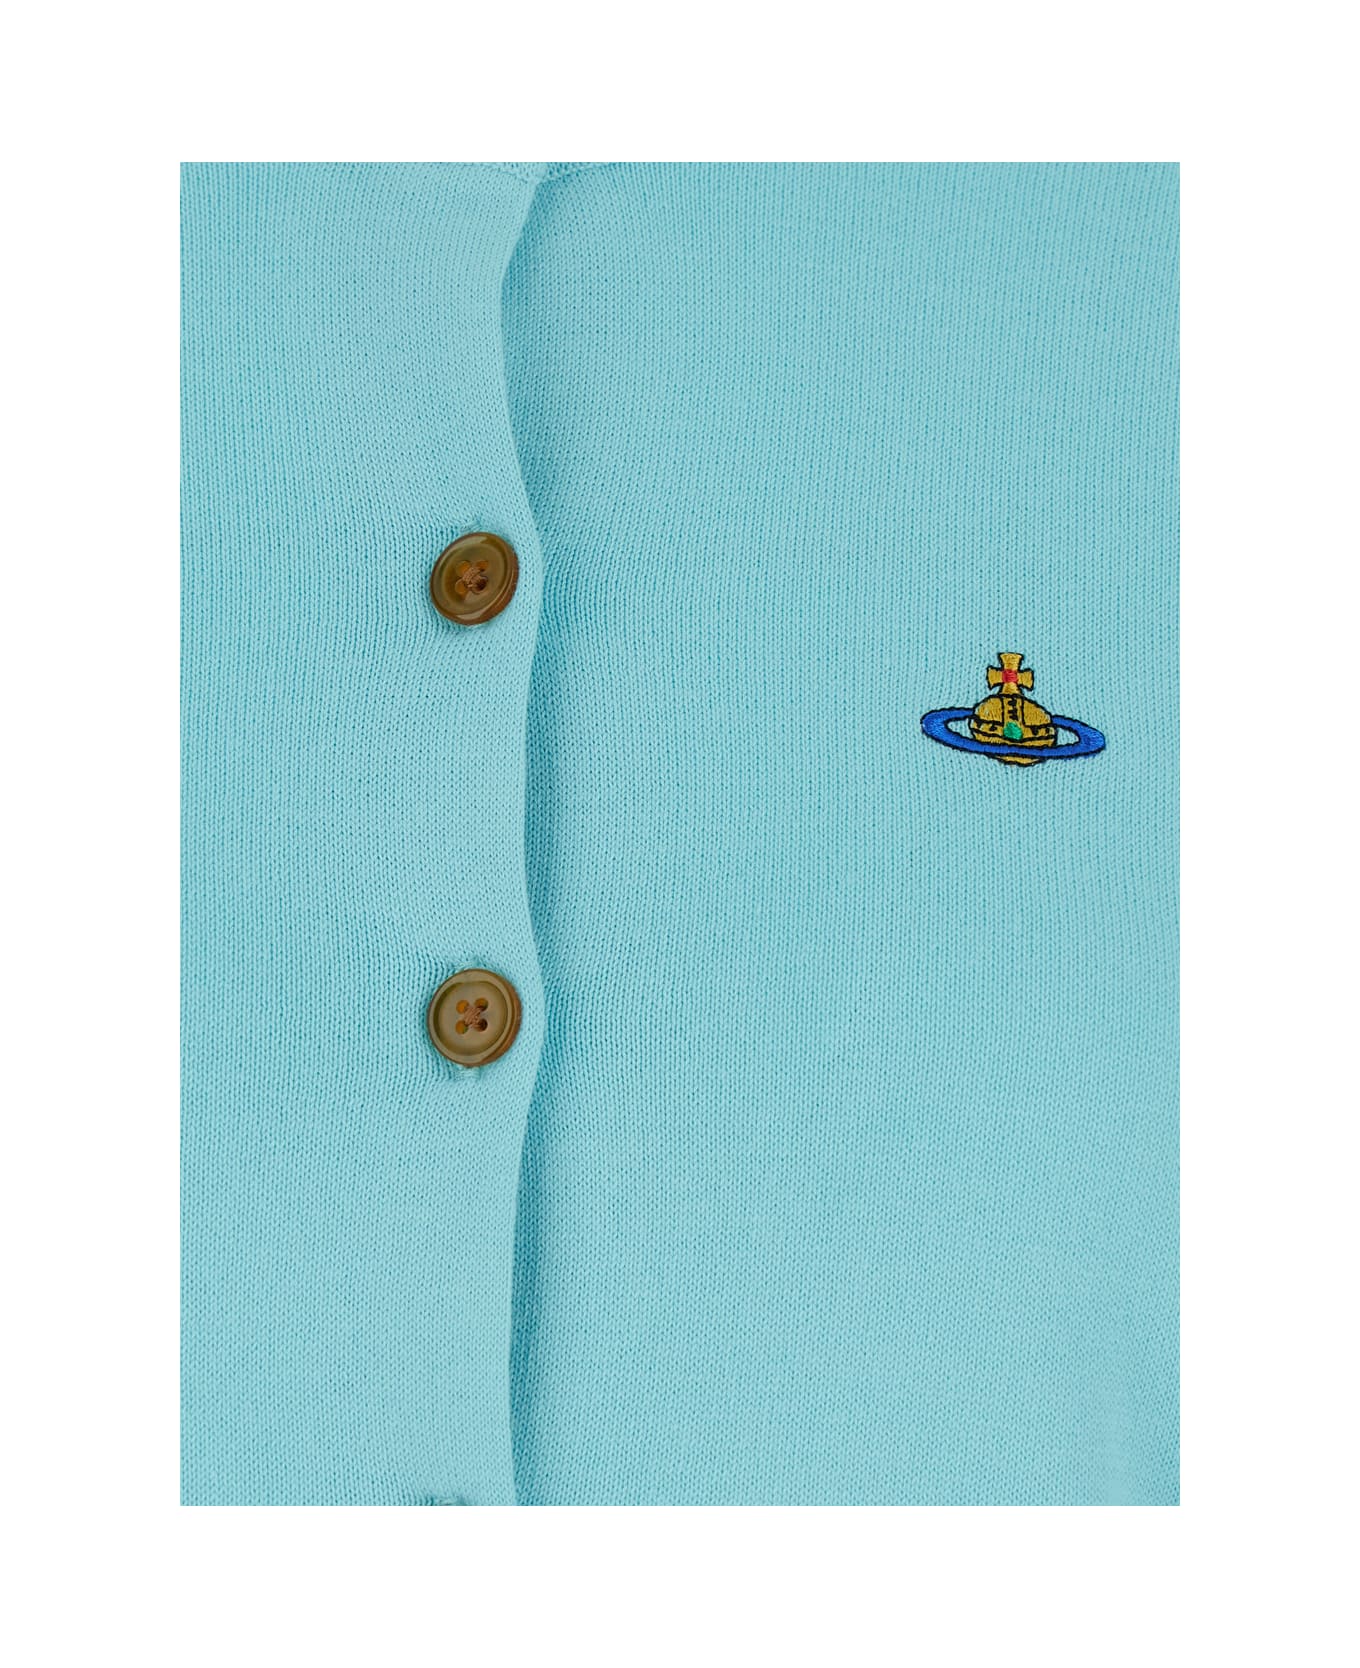 Vivienne Westwood Light Blue Cardigan With Buttons In Cotton Woman - Light blue ニットウェア